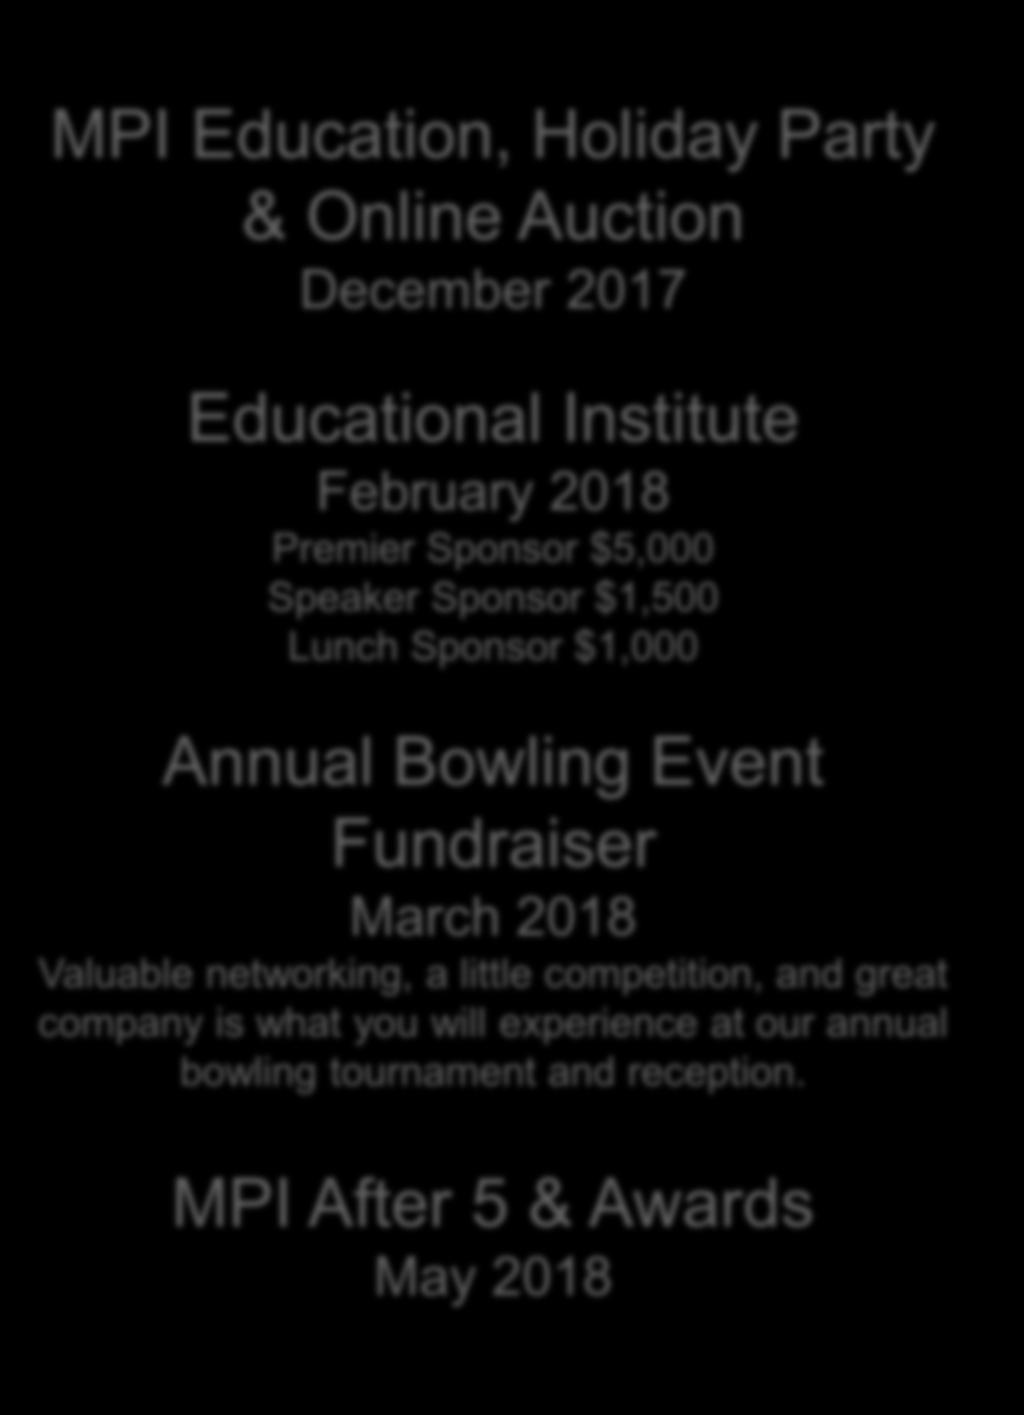 Event Fundraiser March 2018 Valuable networking, a little